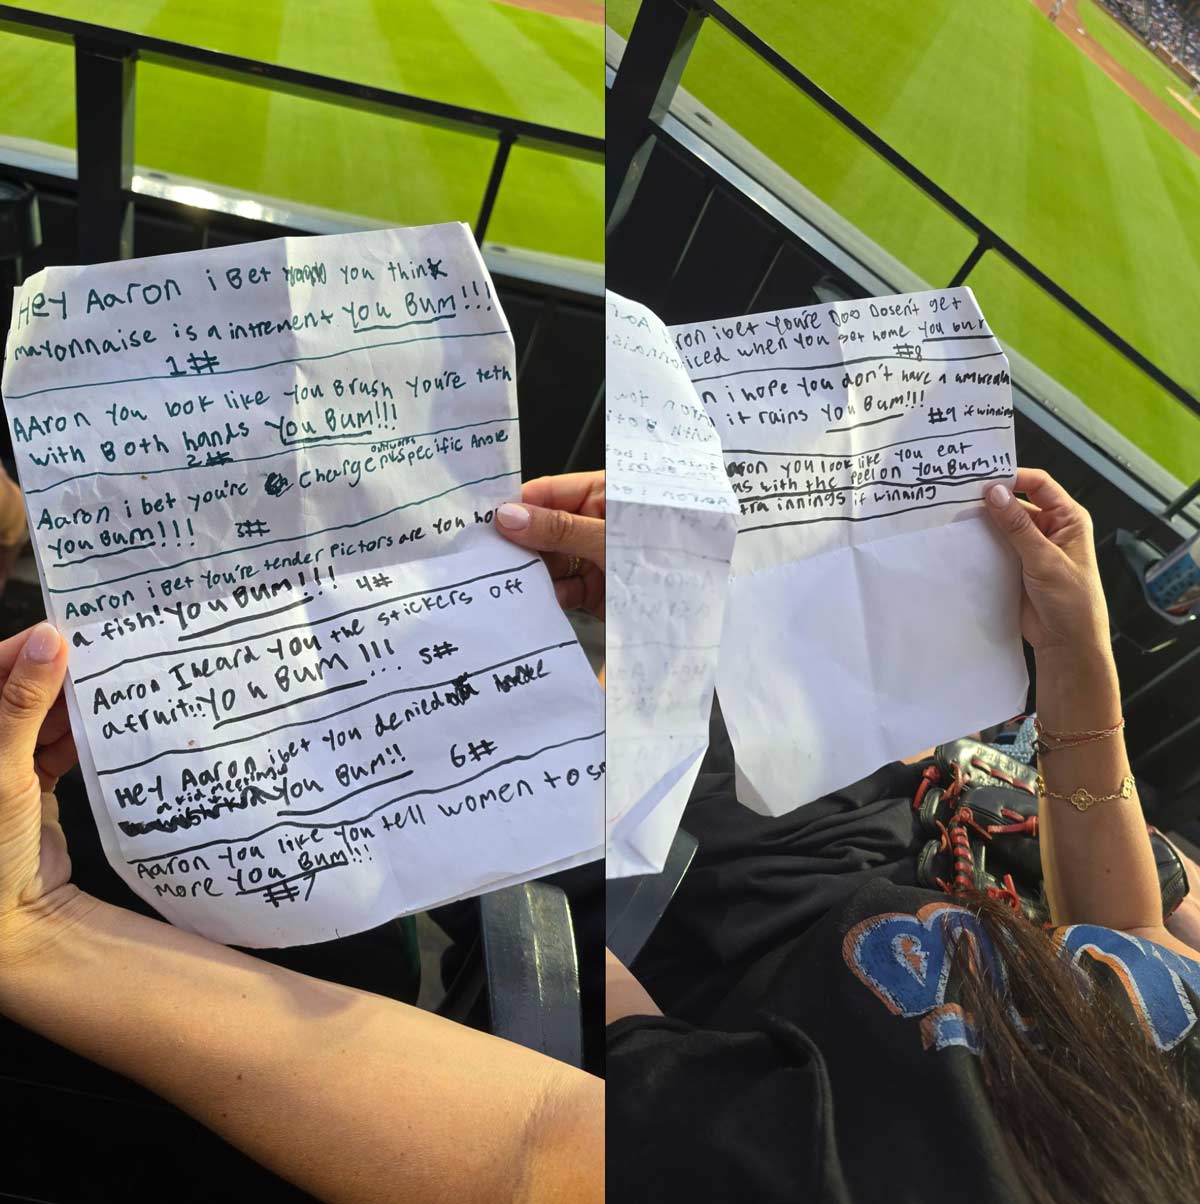 The kids in front of us at the MetsYankees game have this script of insults